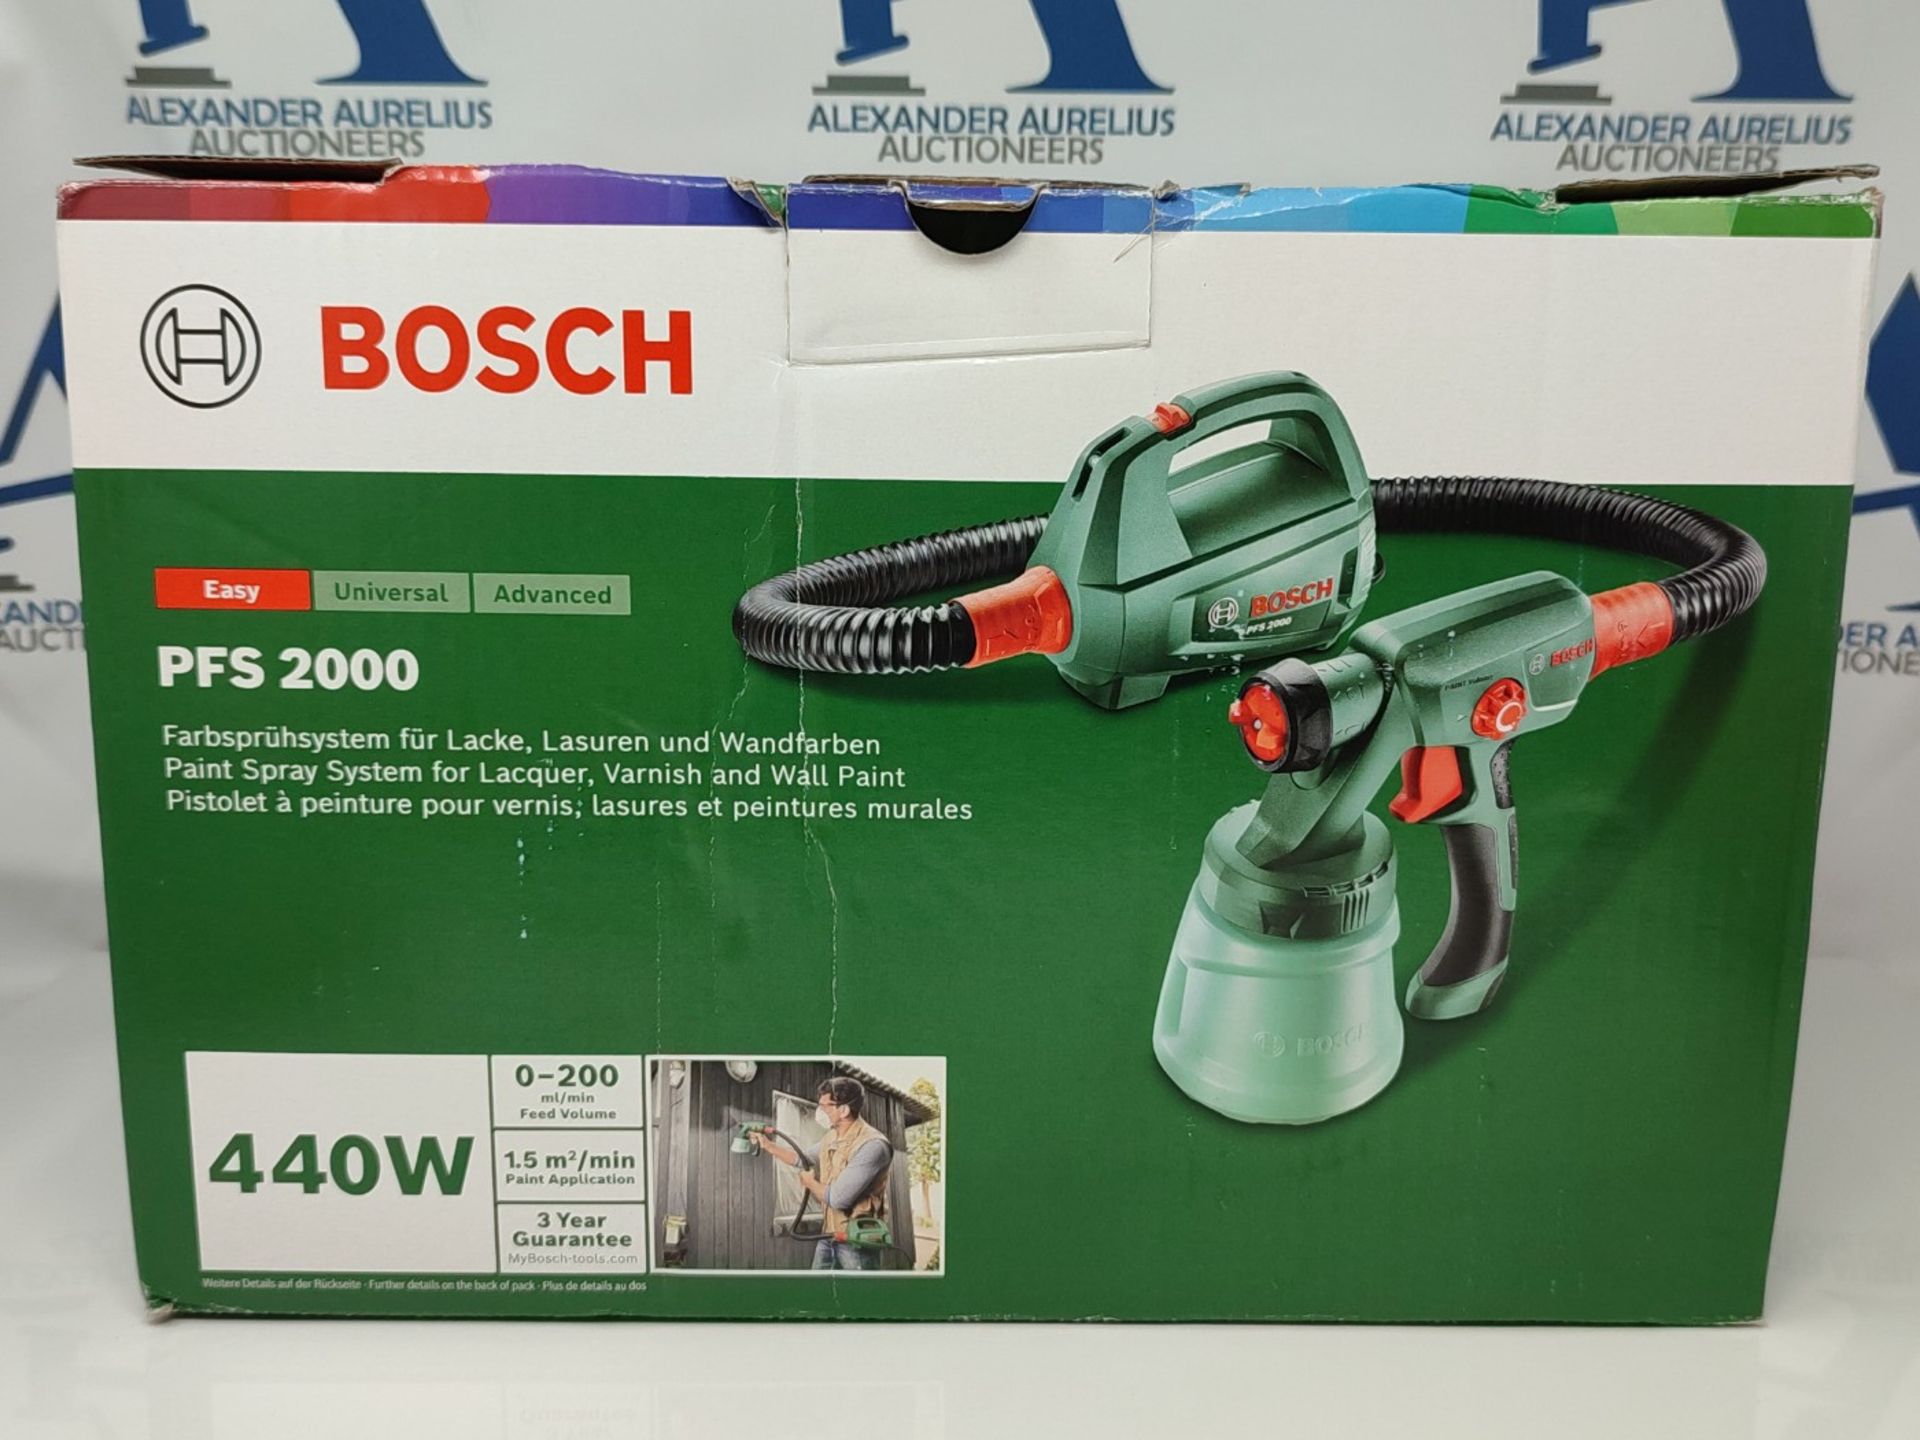 RRP £78.00 Bosch Home and Garden Electric Paint Spray System PFS 2000 (440 W, in carton packaging - Image 2 of 3